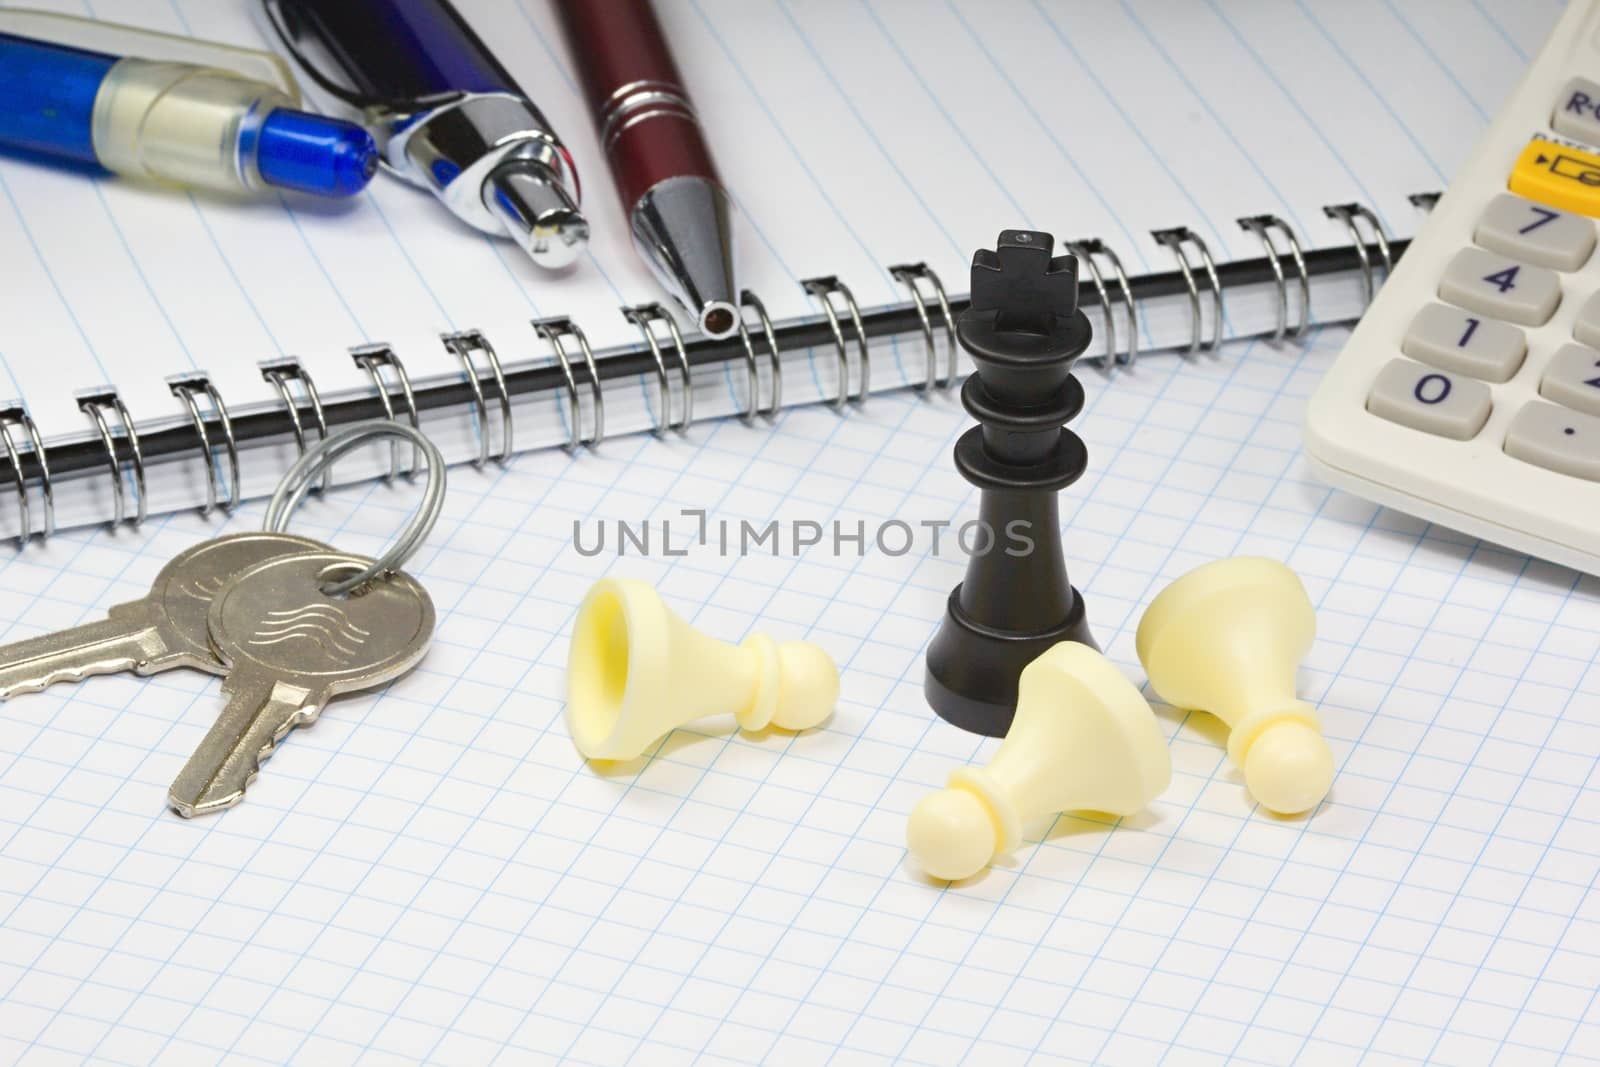 Photo shows keys, chess figurines, paper block and pencils on a business table.